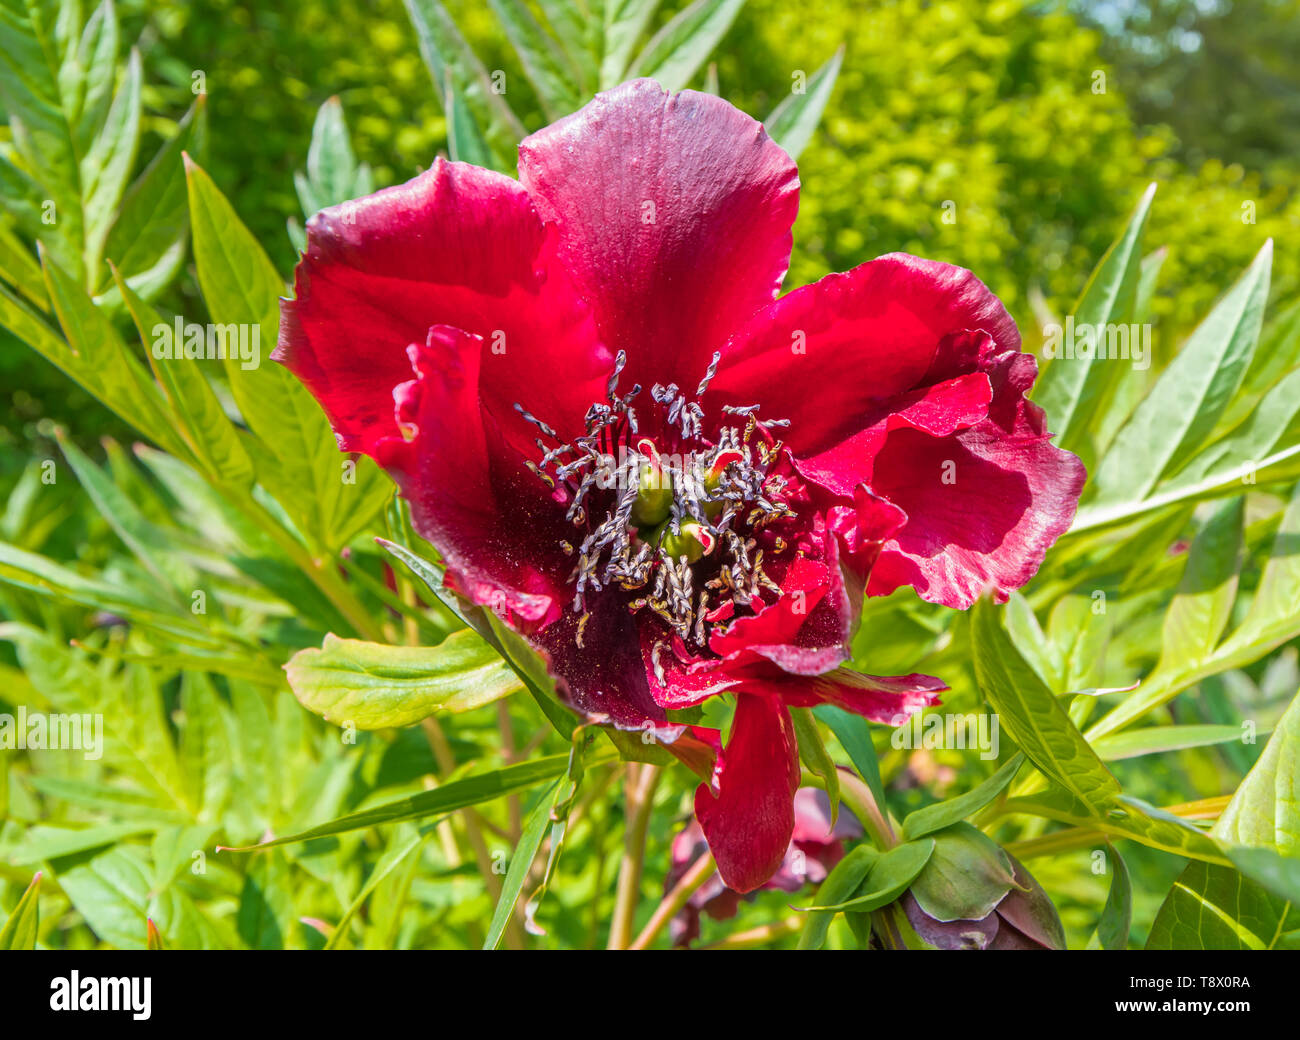 Red Tree Peony, a large flower from the genus Paeonia, growing in Spring (May) in West Sussex, England, UK. Stock Photo